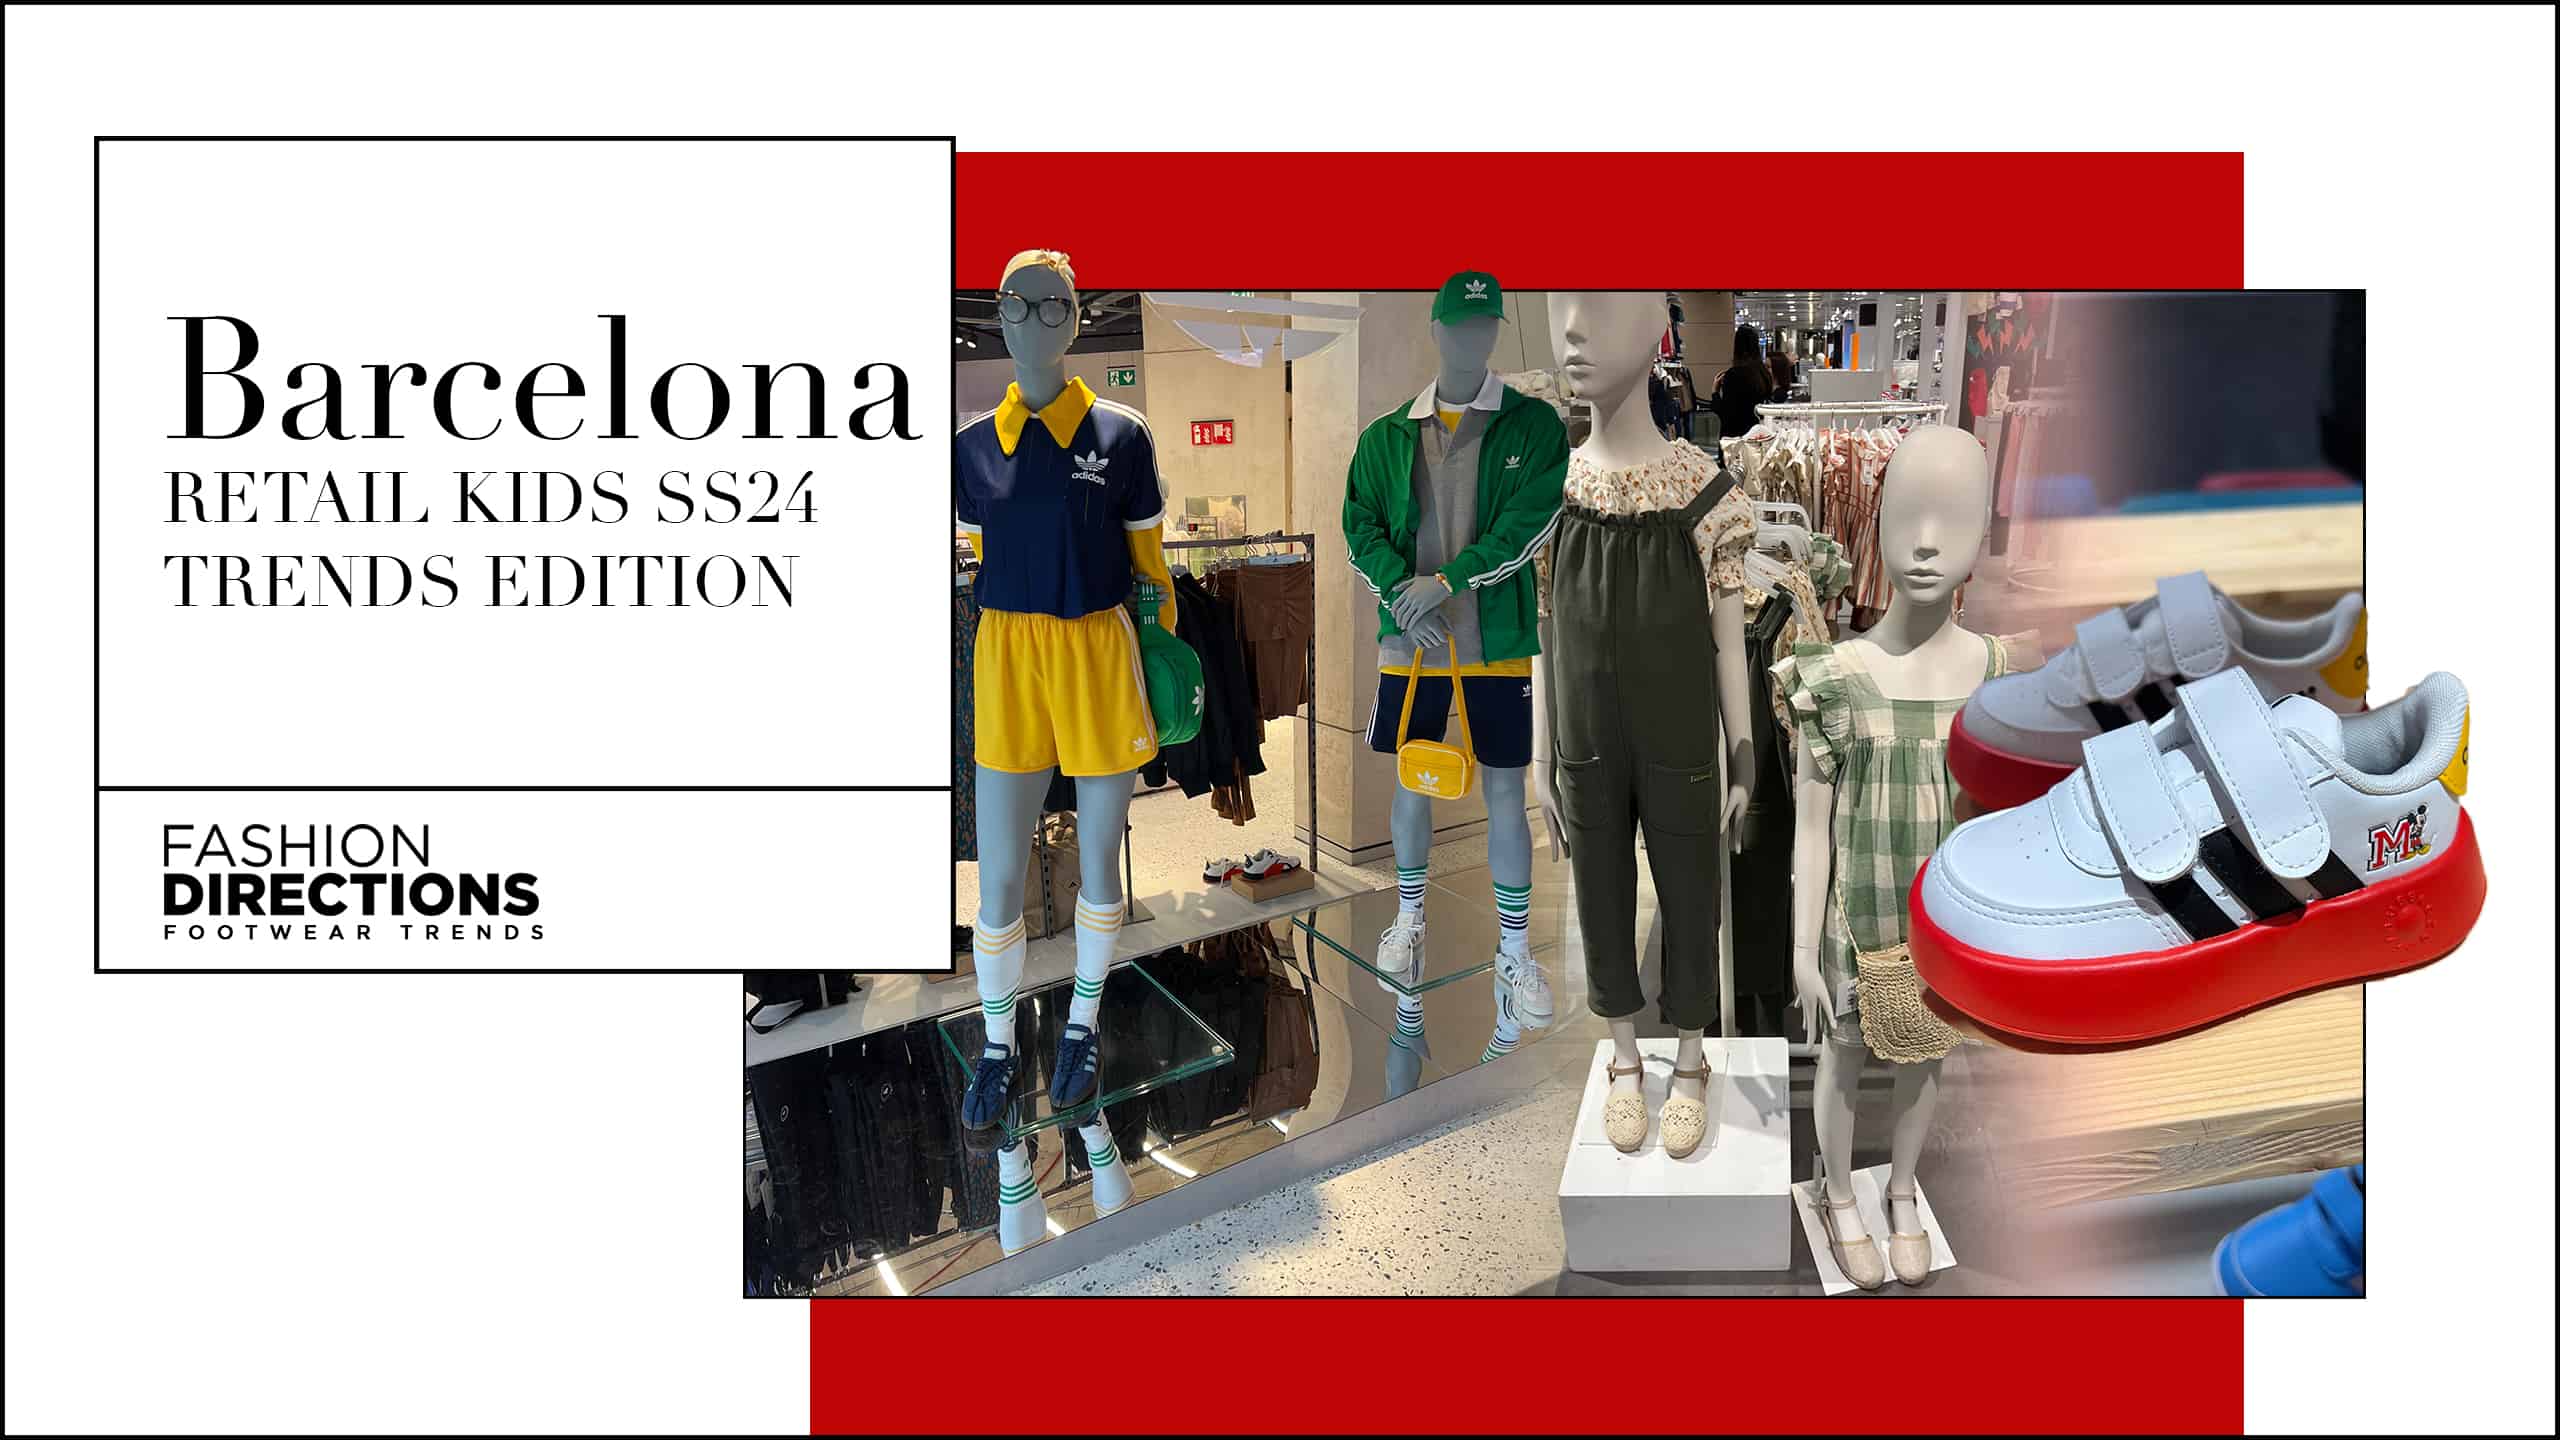 Barcelona Retail Kids ss24 Trends Edition